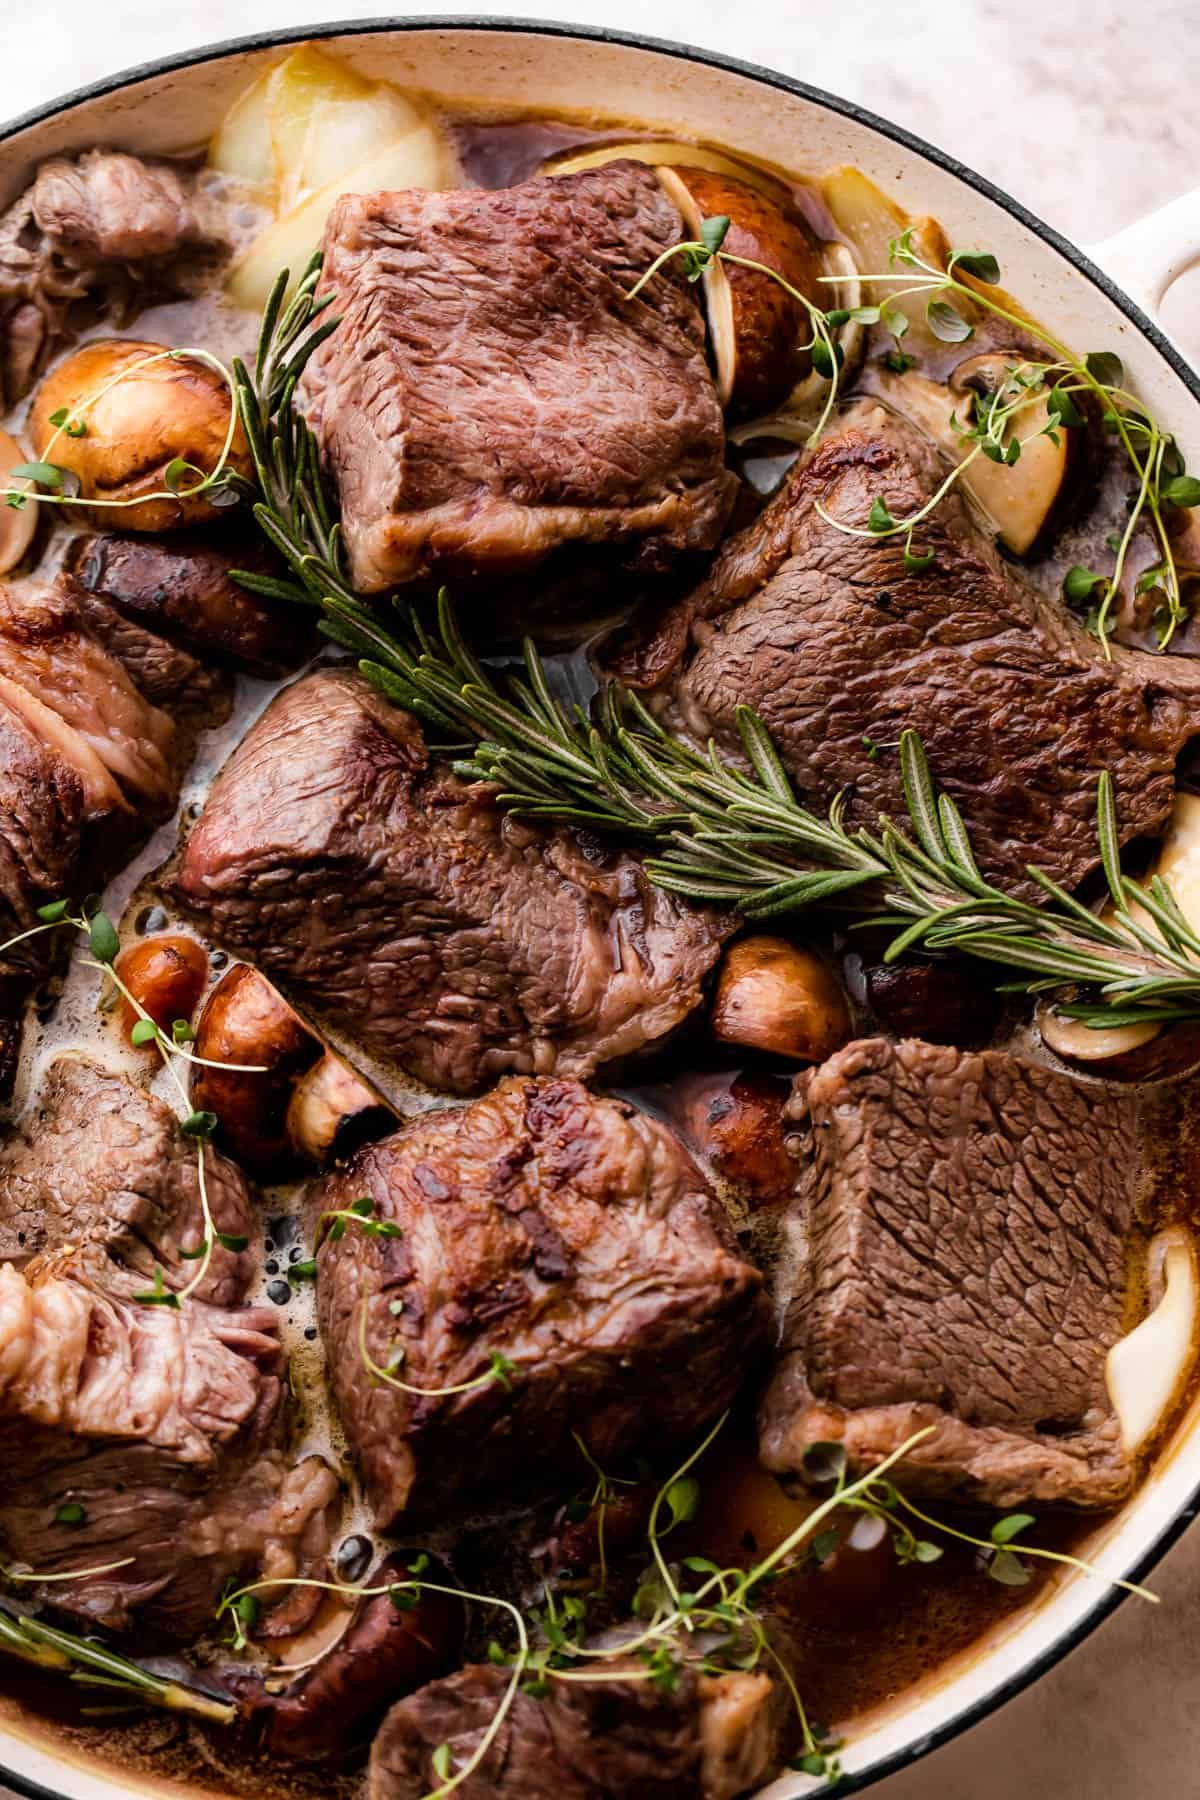 Browned beef chunks are placed in a white braiser with vegetables and rosemary sprigs.